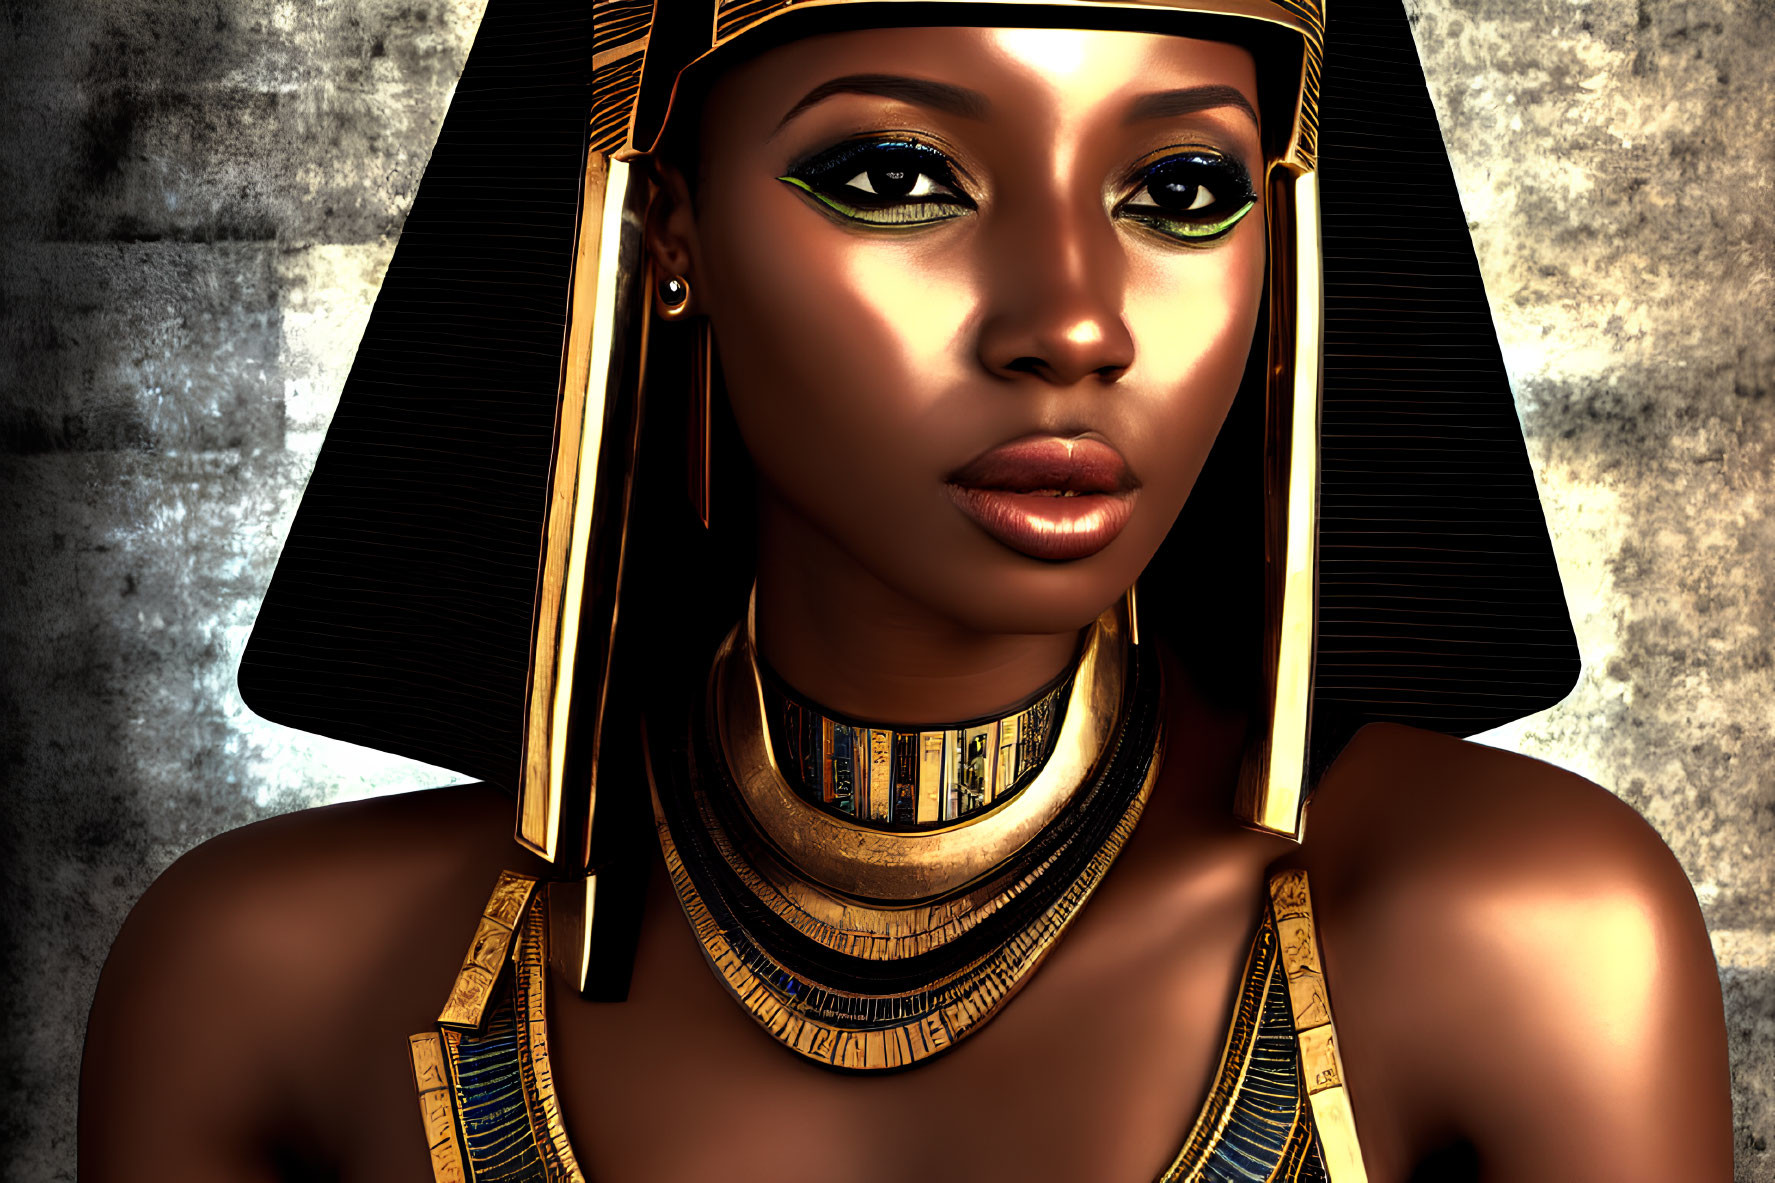 Digital artwork of woman as ancient Egyptian queen with elaborate headdress, eye makeup, and jewelry